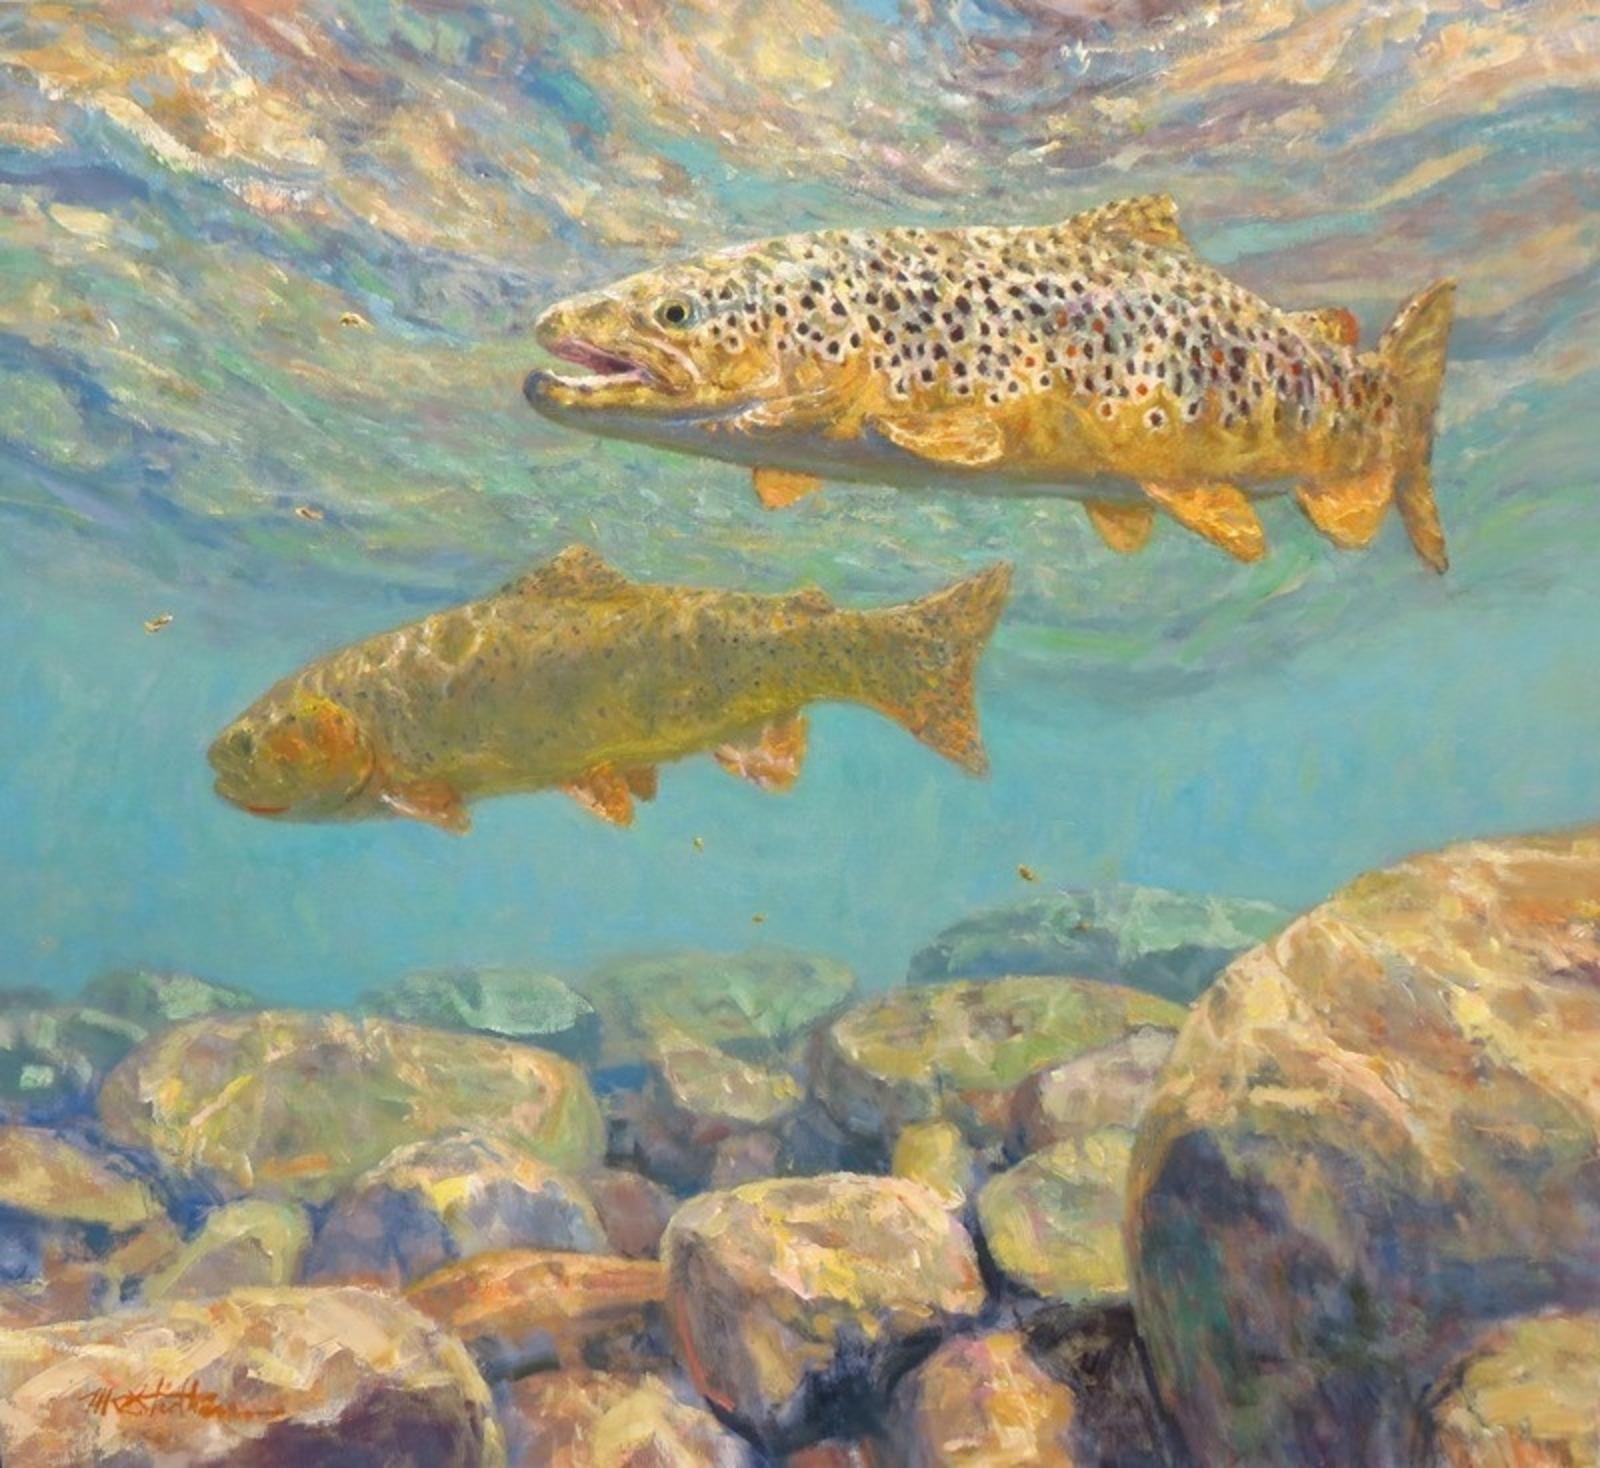 &quot;South Fork Gold&quot; by Utah artist and fly fisherman Michael Stidham. Stidham has been called one of &quot;the greatest fish-painter impressionists of his generation&quot; and his work is collected by avid anglers and non-anglers throughout the world. He has a special affinity, he says, for the waters of Greater Yellowstone Ecosystem, as evidenced by this reference to the South Fork of the Snake River in eastern Idaho. 